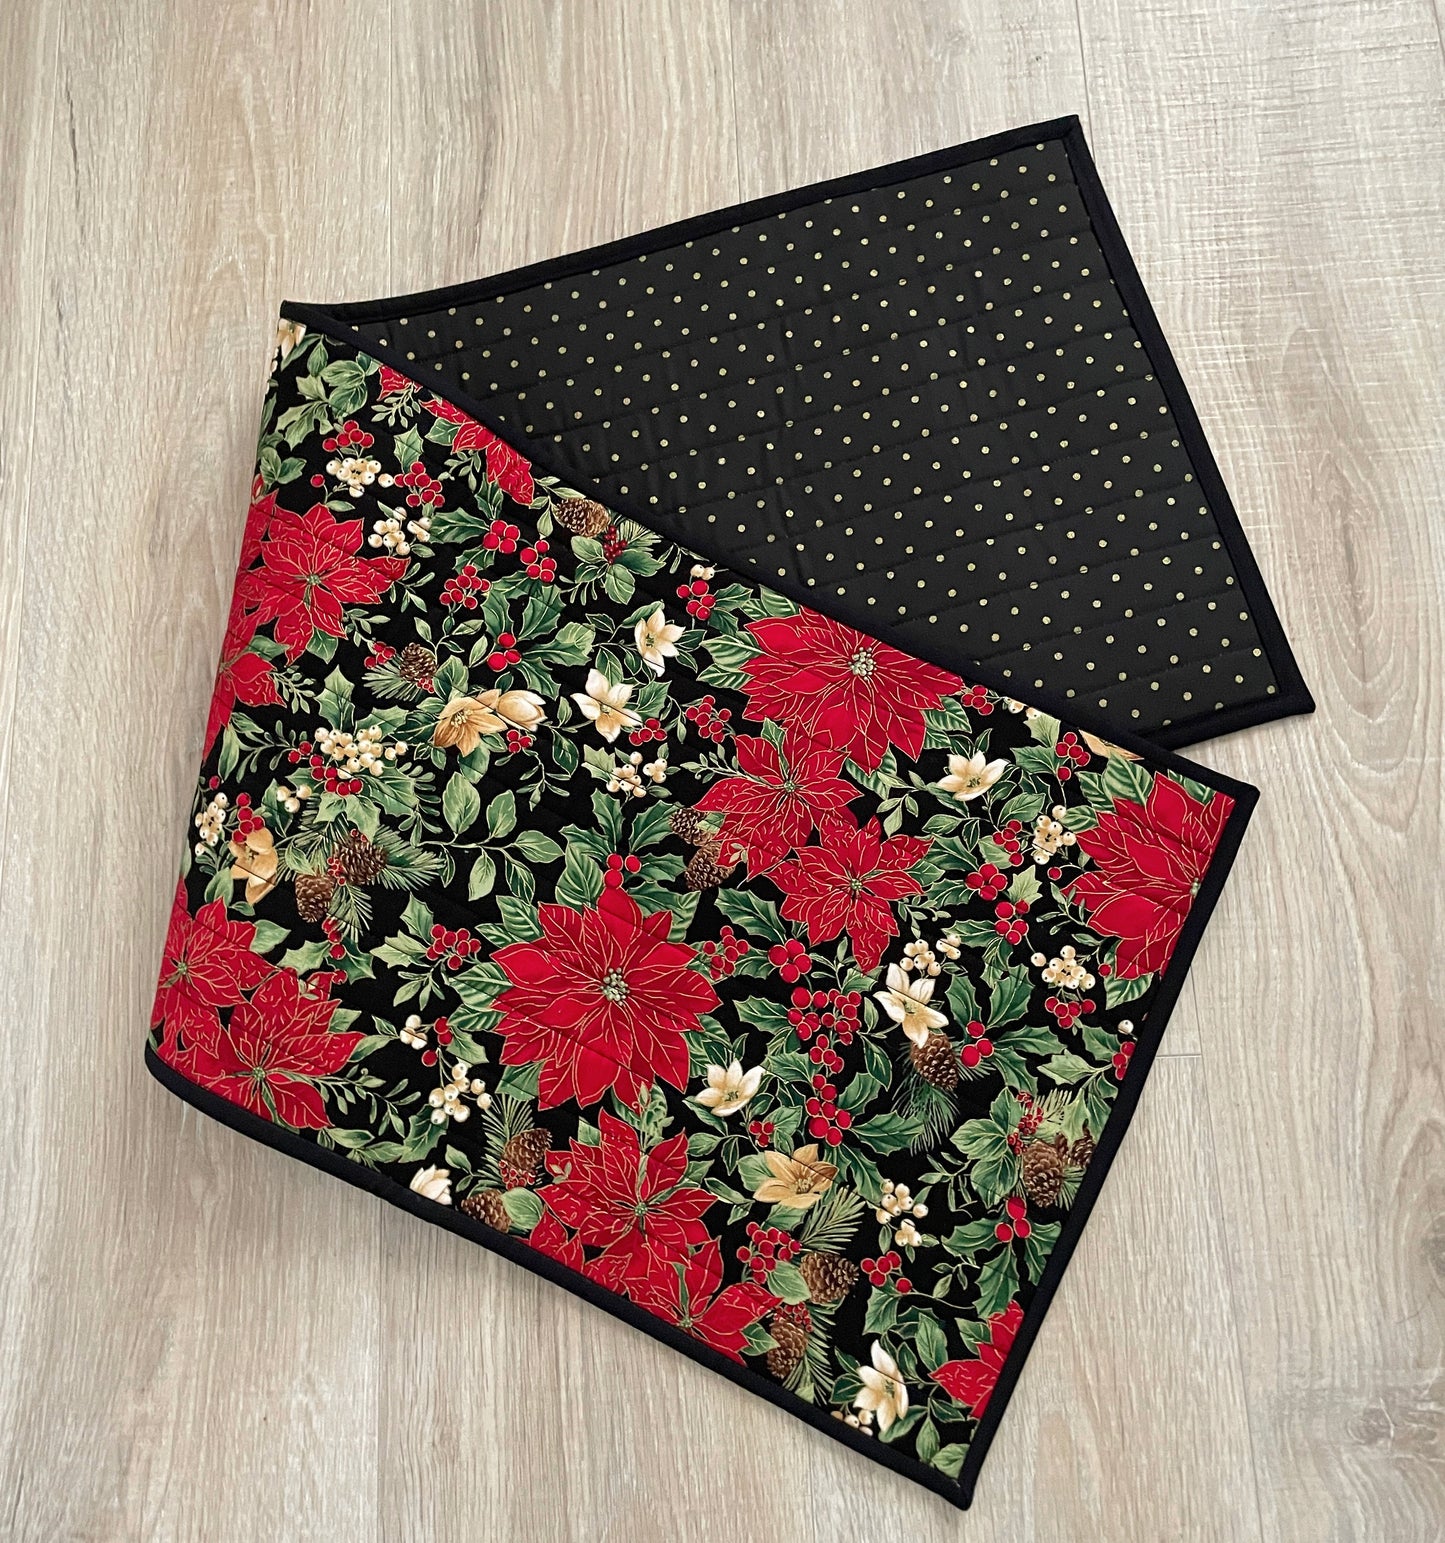 Quilted Christmas Table Runner, Beautiful Red and Black Poinsettia Handmade Runner